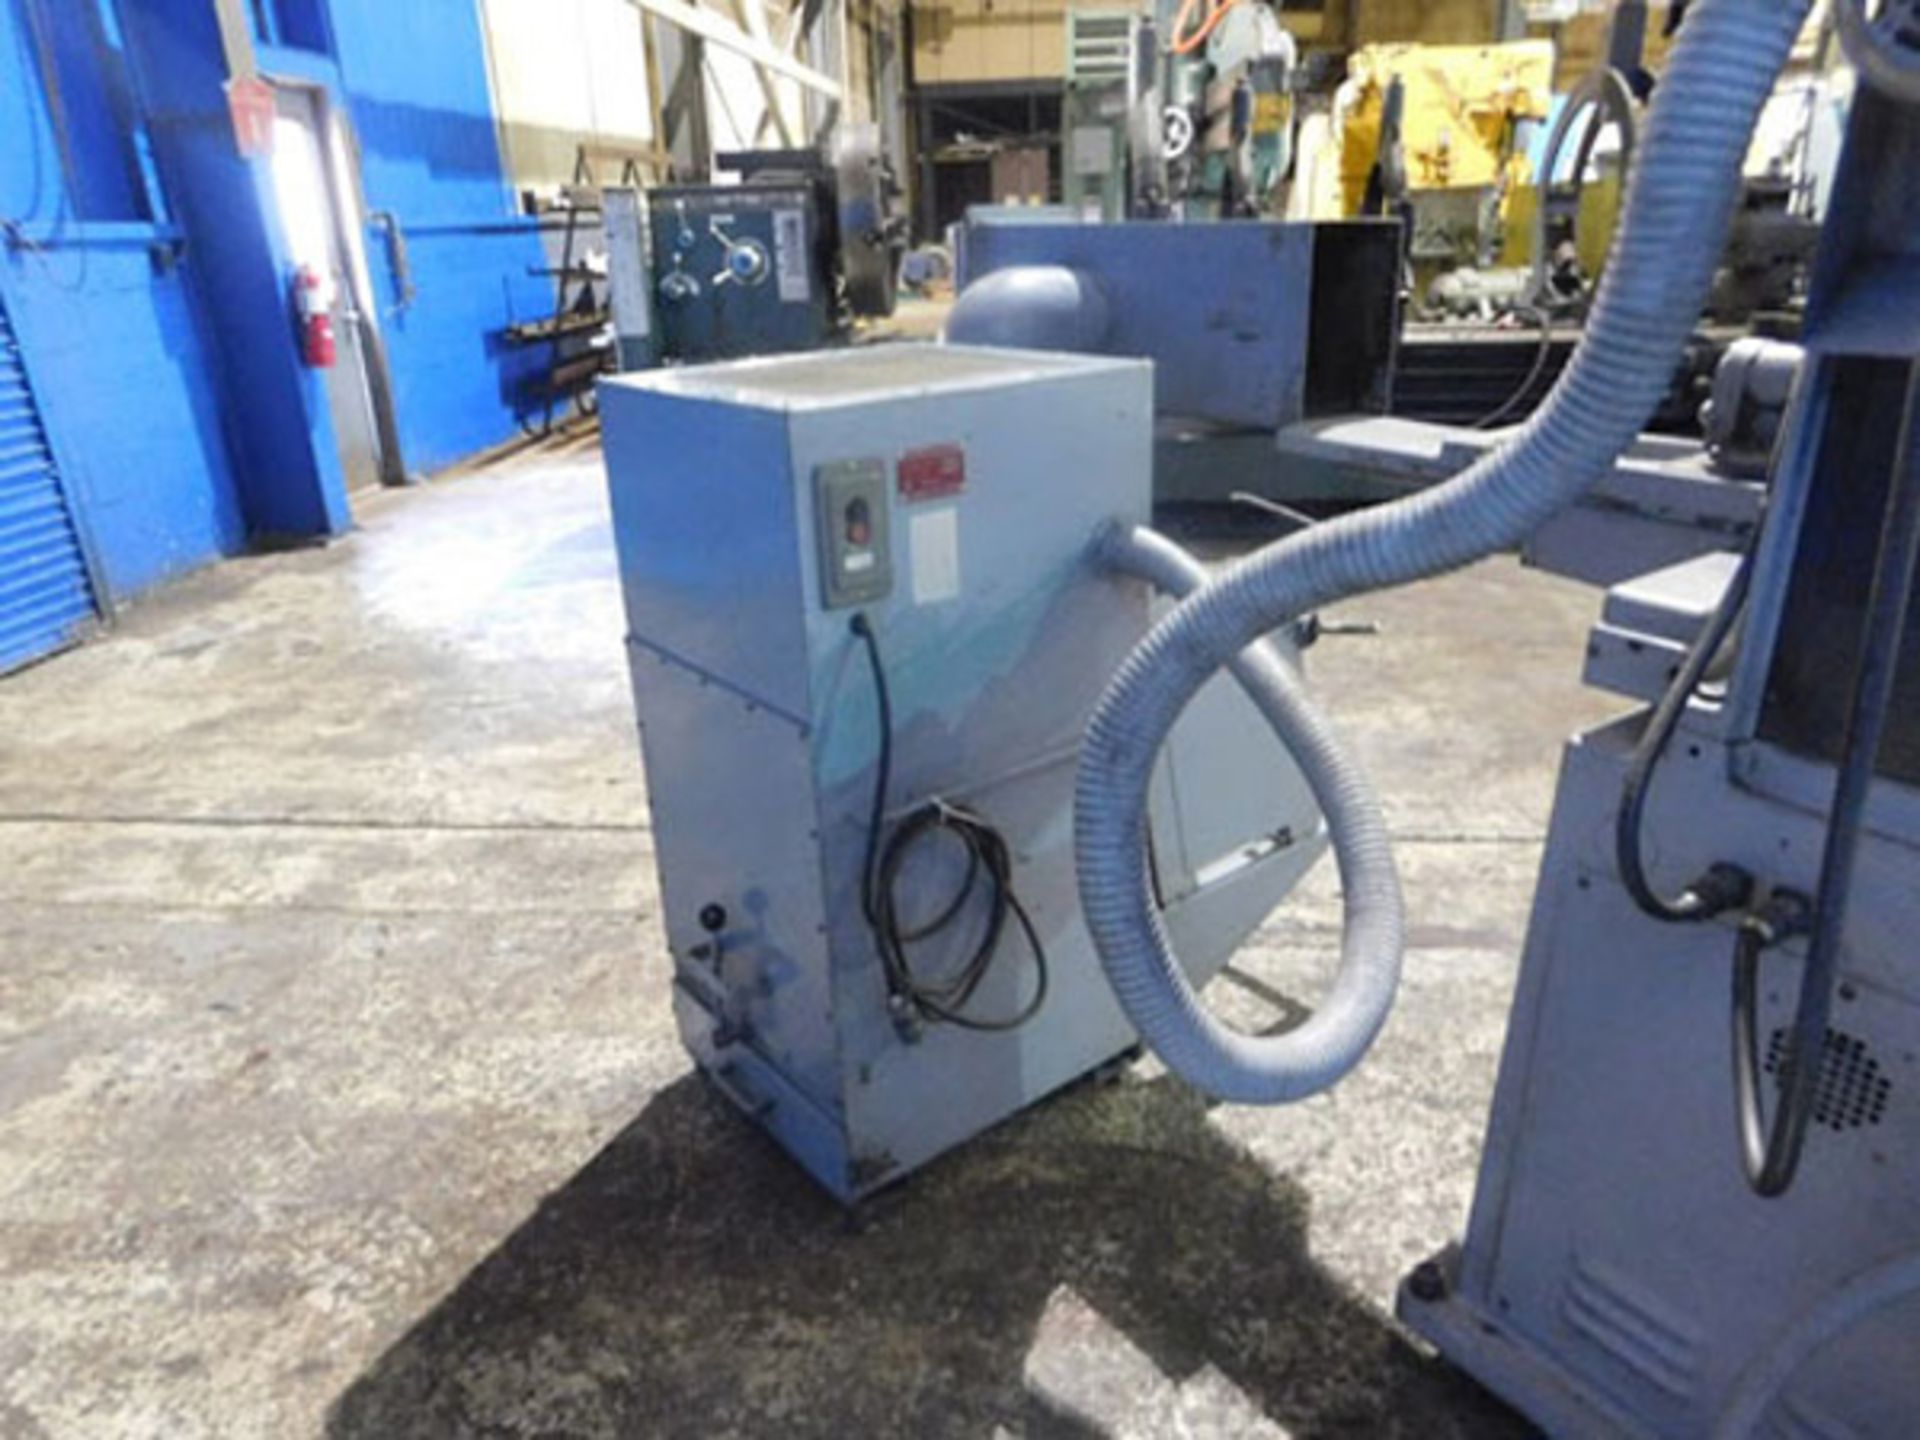 Nicco Automatic Hydraulic Surface Grinder | 6" x 18", Mdl: NFG-515H, S/N: D4020 - 7809P - Image 11 of 12